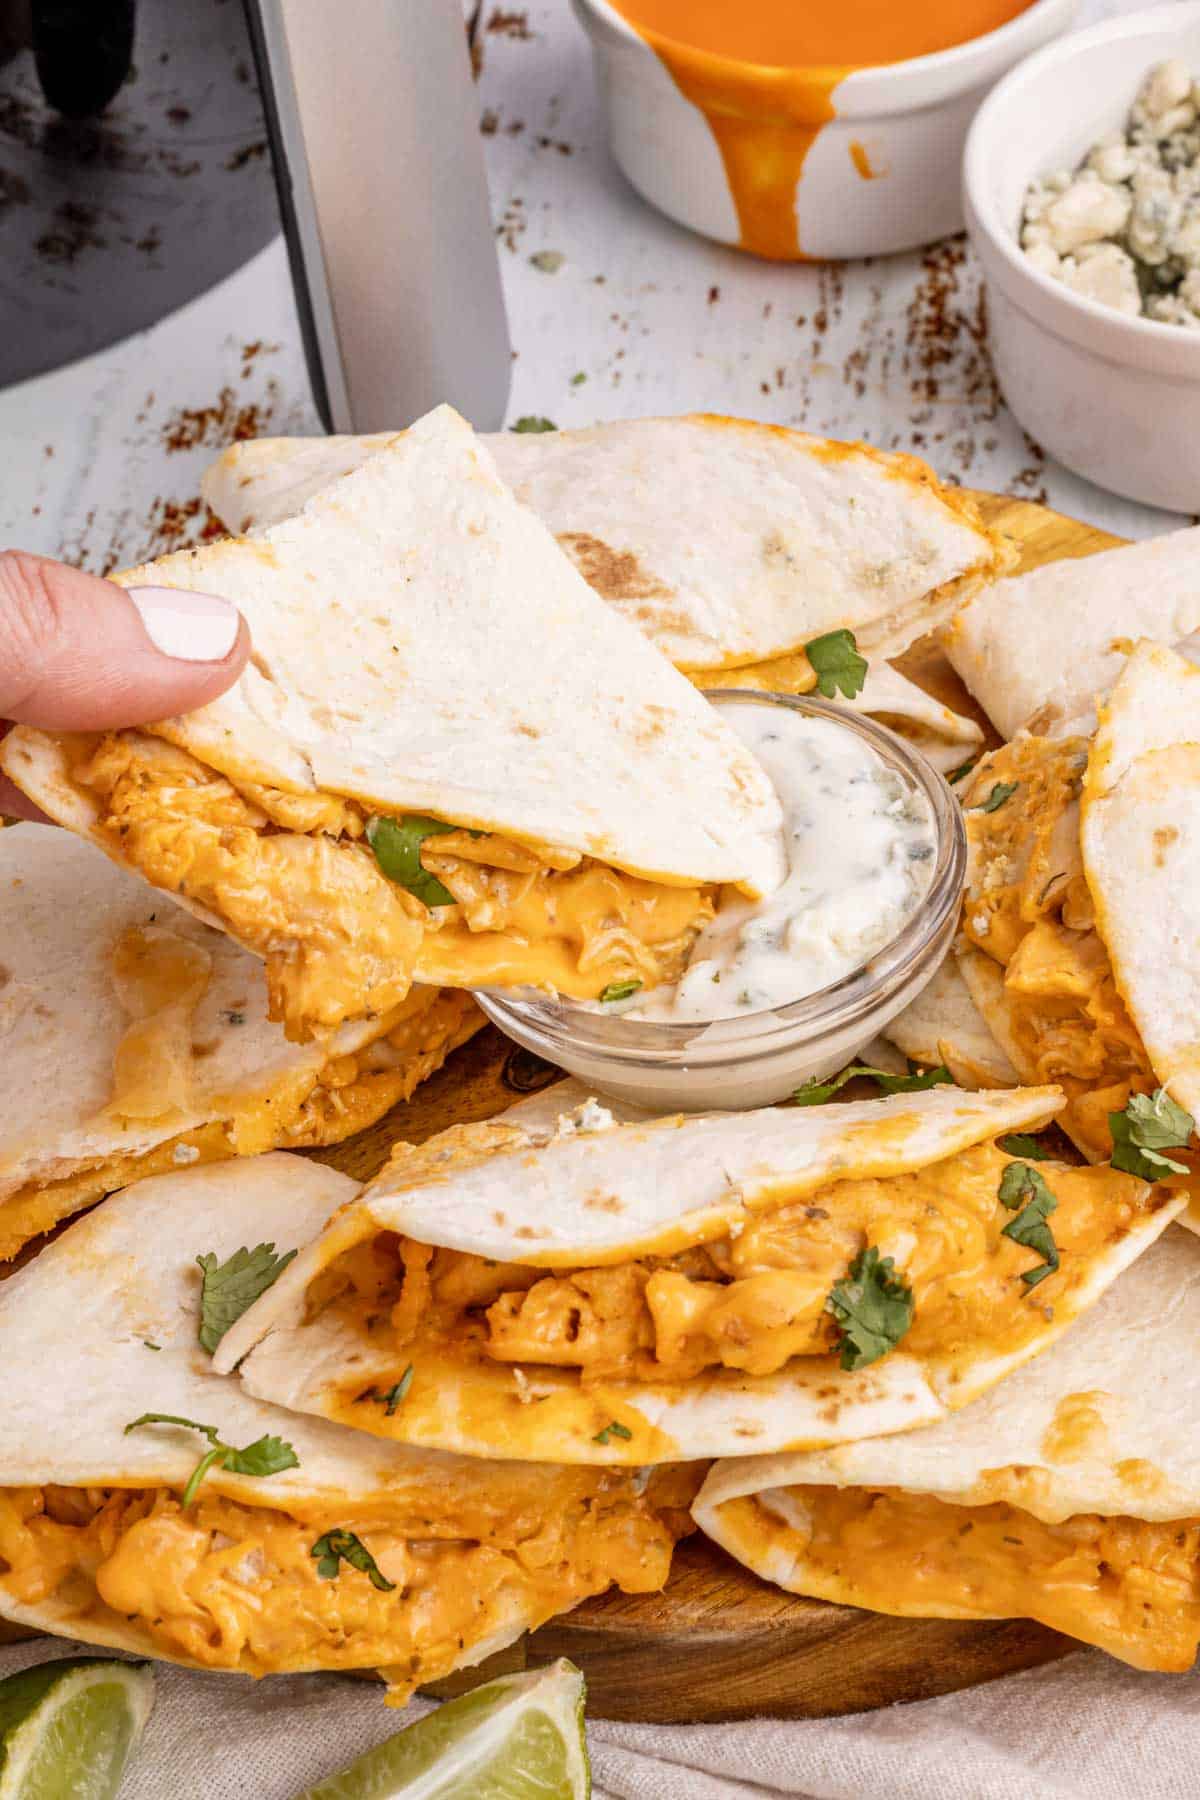 A hand dipping a quesadilla into ranch dressing.